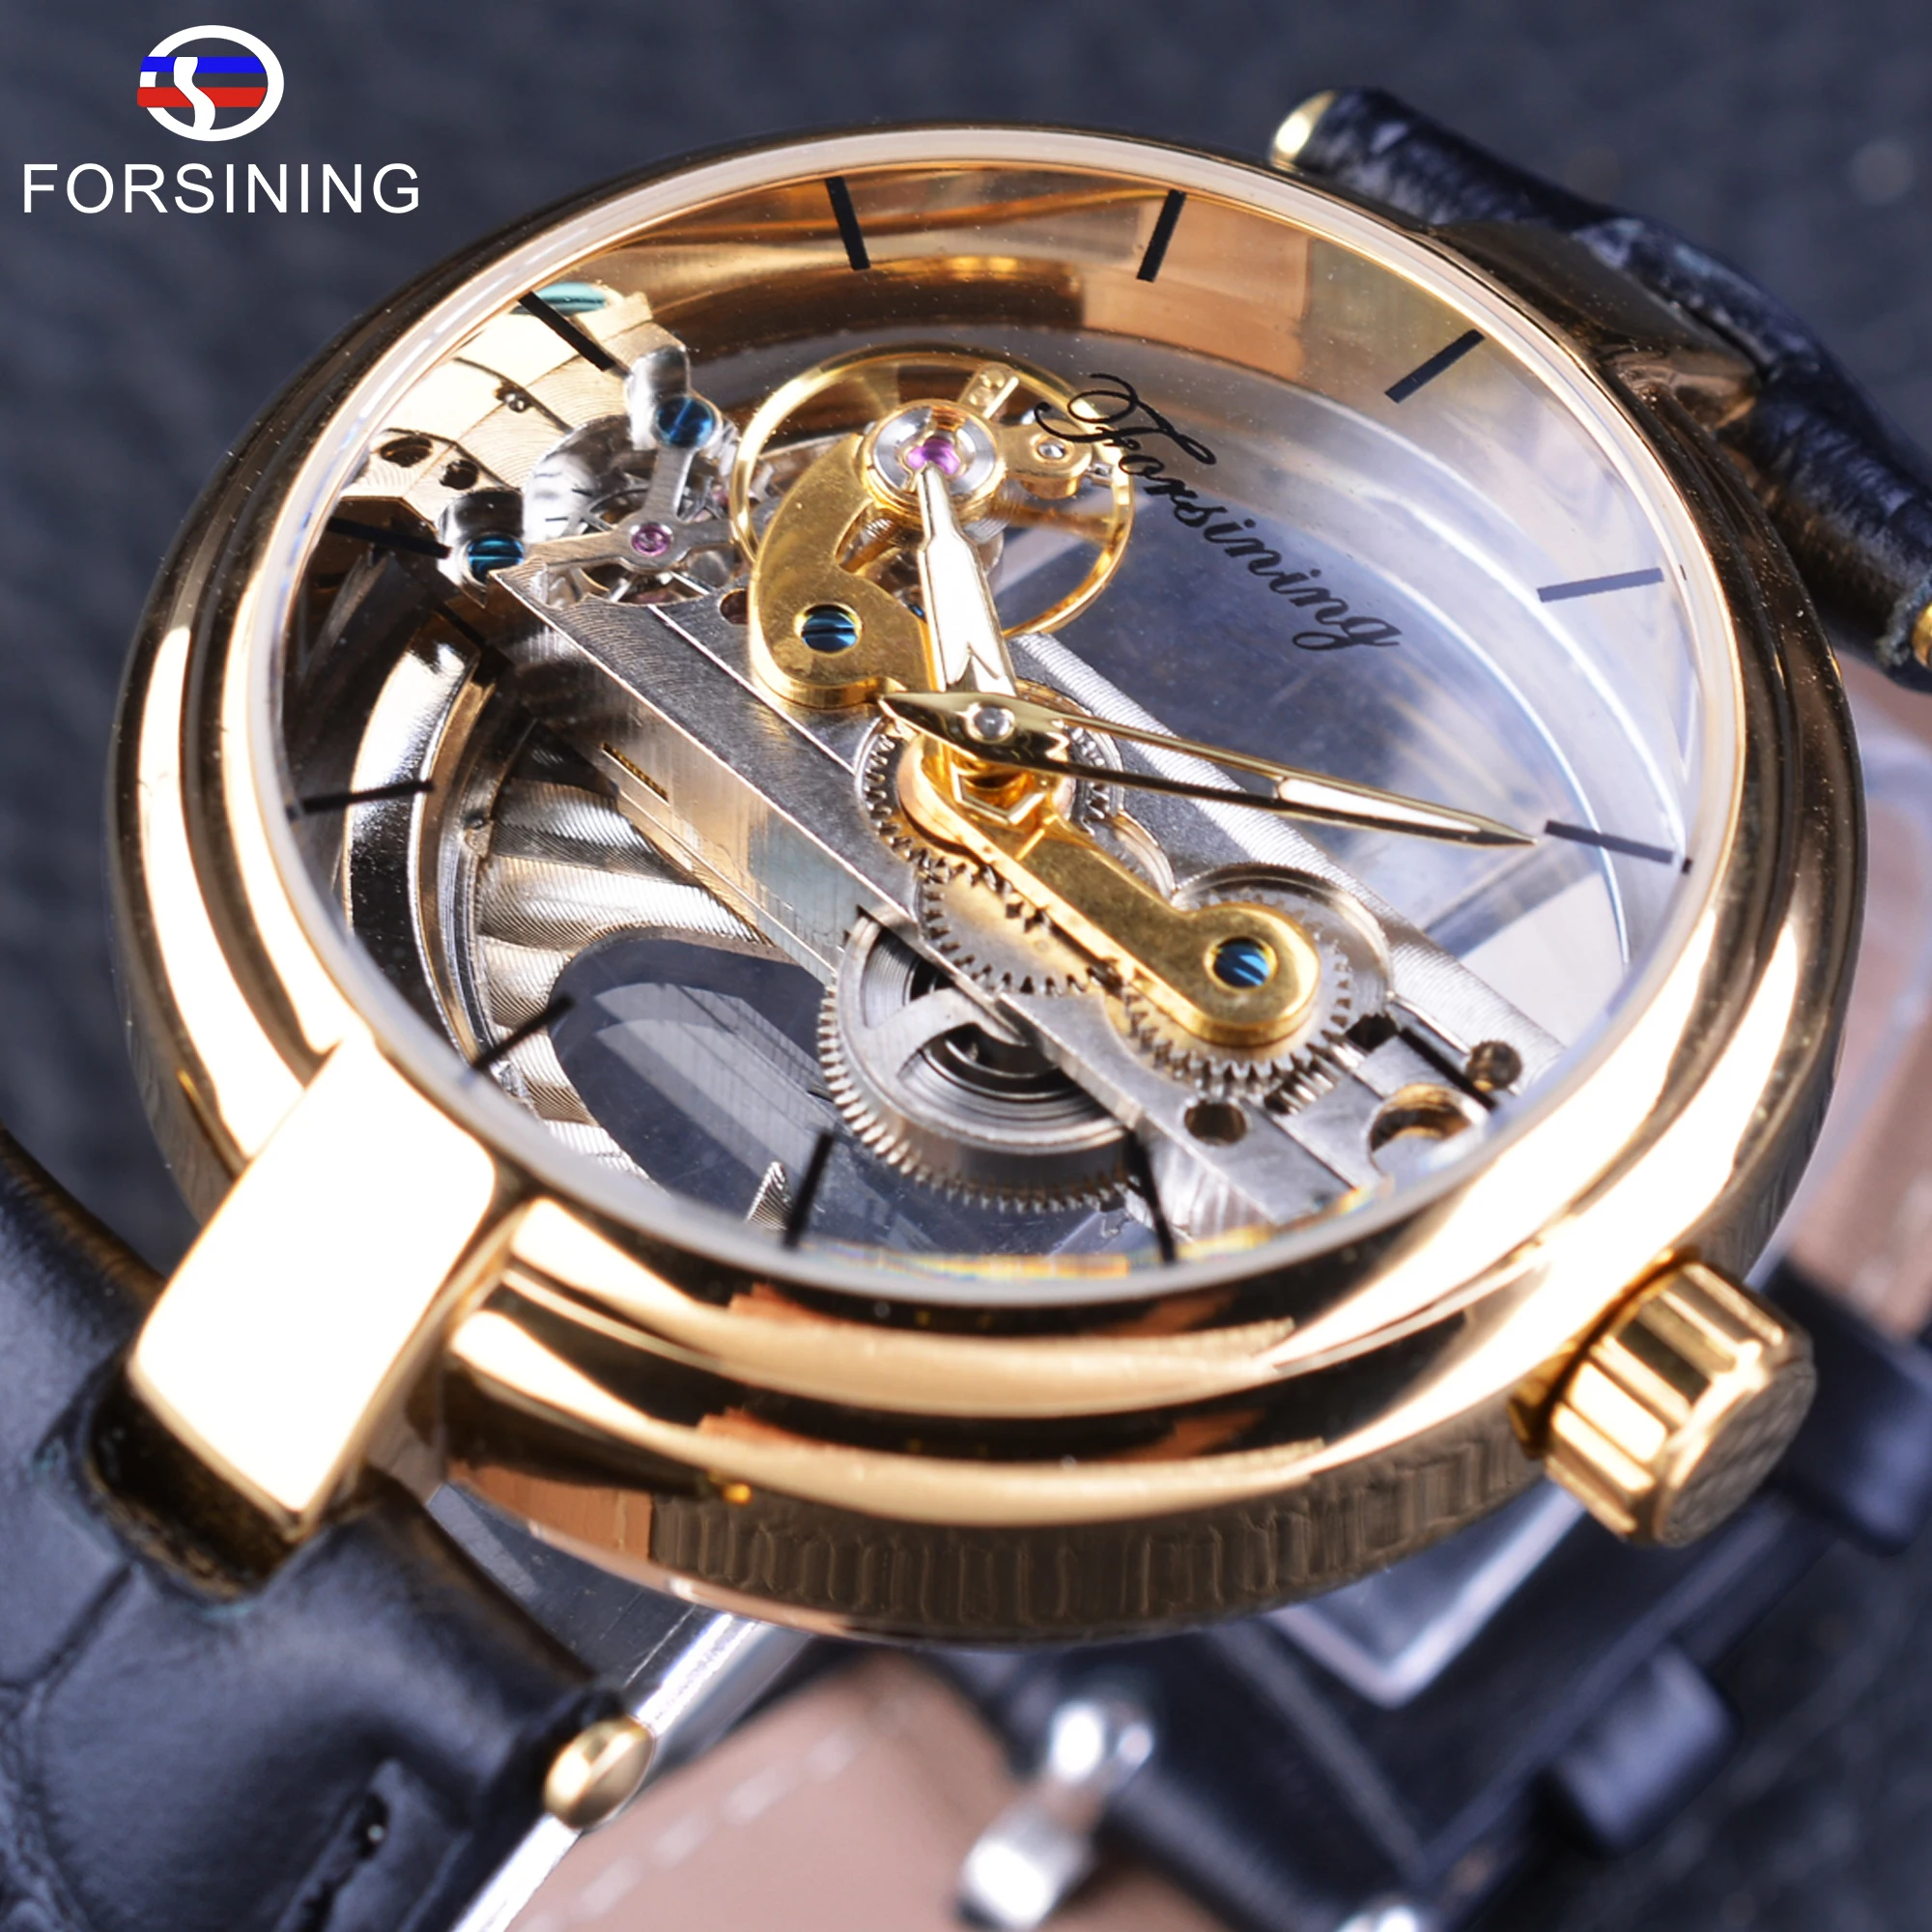 Forsining 2017 New Golden Skeleton Watch Genuine Leather Belt Men's Automatic Watches Top Brand Luxury Water Resistant